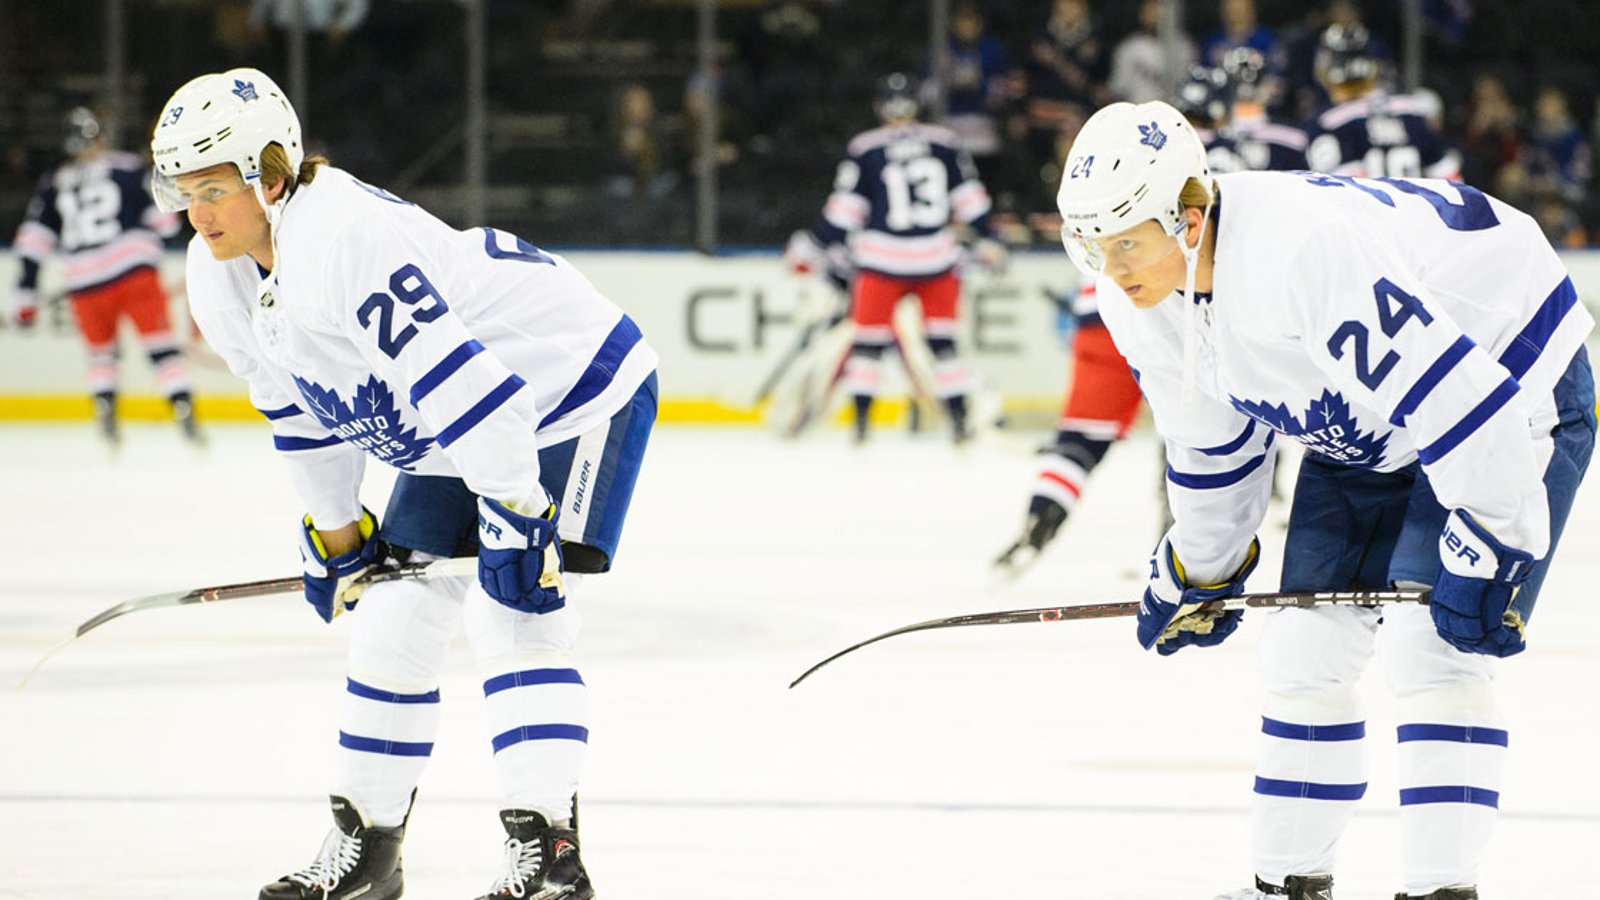 Breaking: Leafs' Nylander and Kapanen involved in car accident